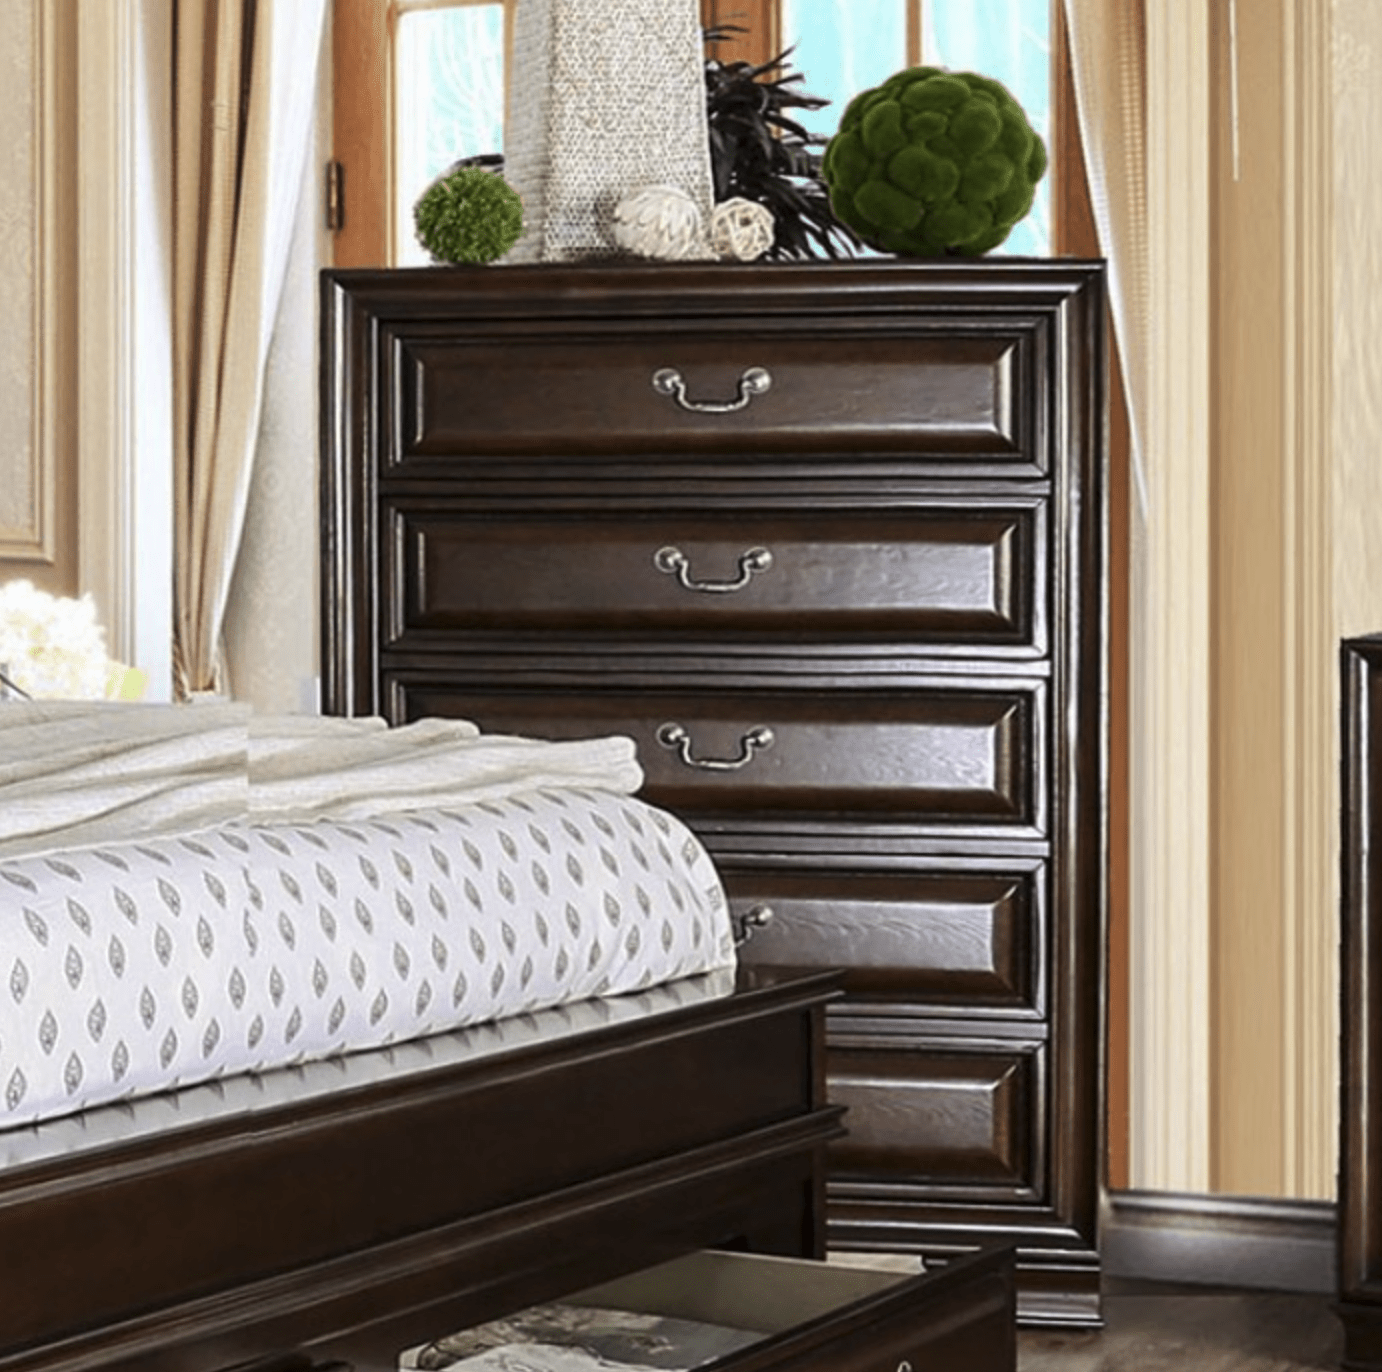 Brandt 5-Drawer Chest with Cedar Lined Drawers in Brown Cherry